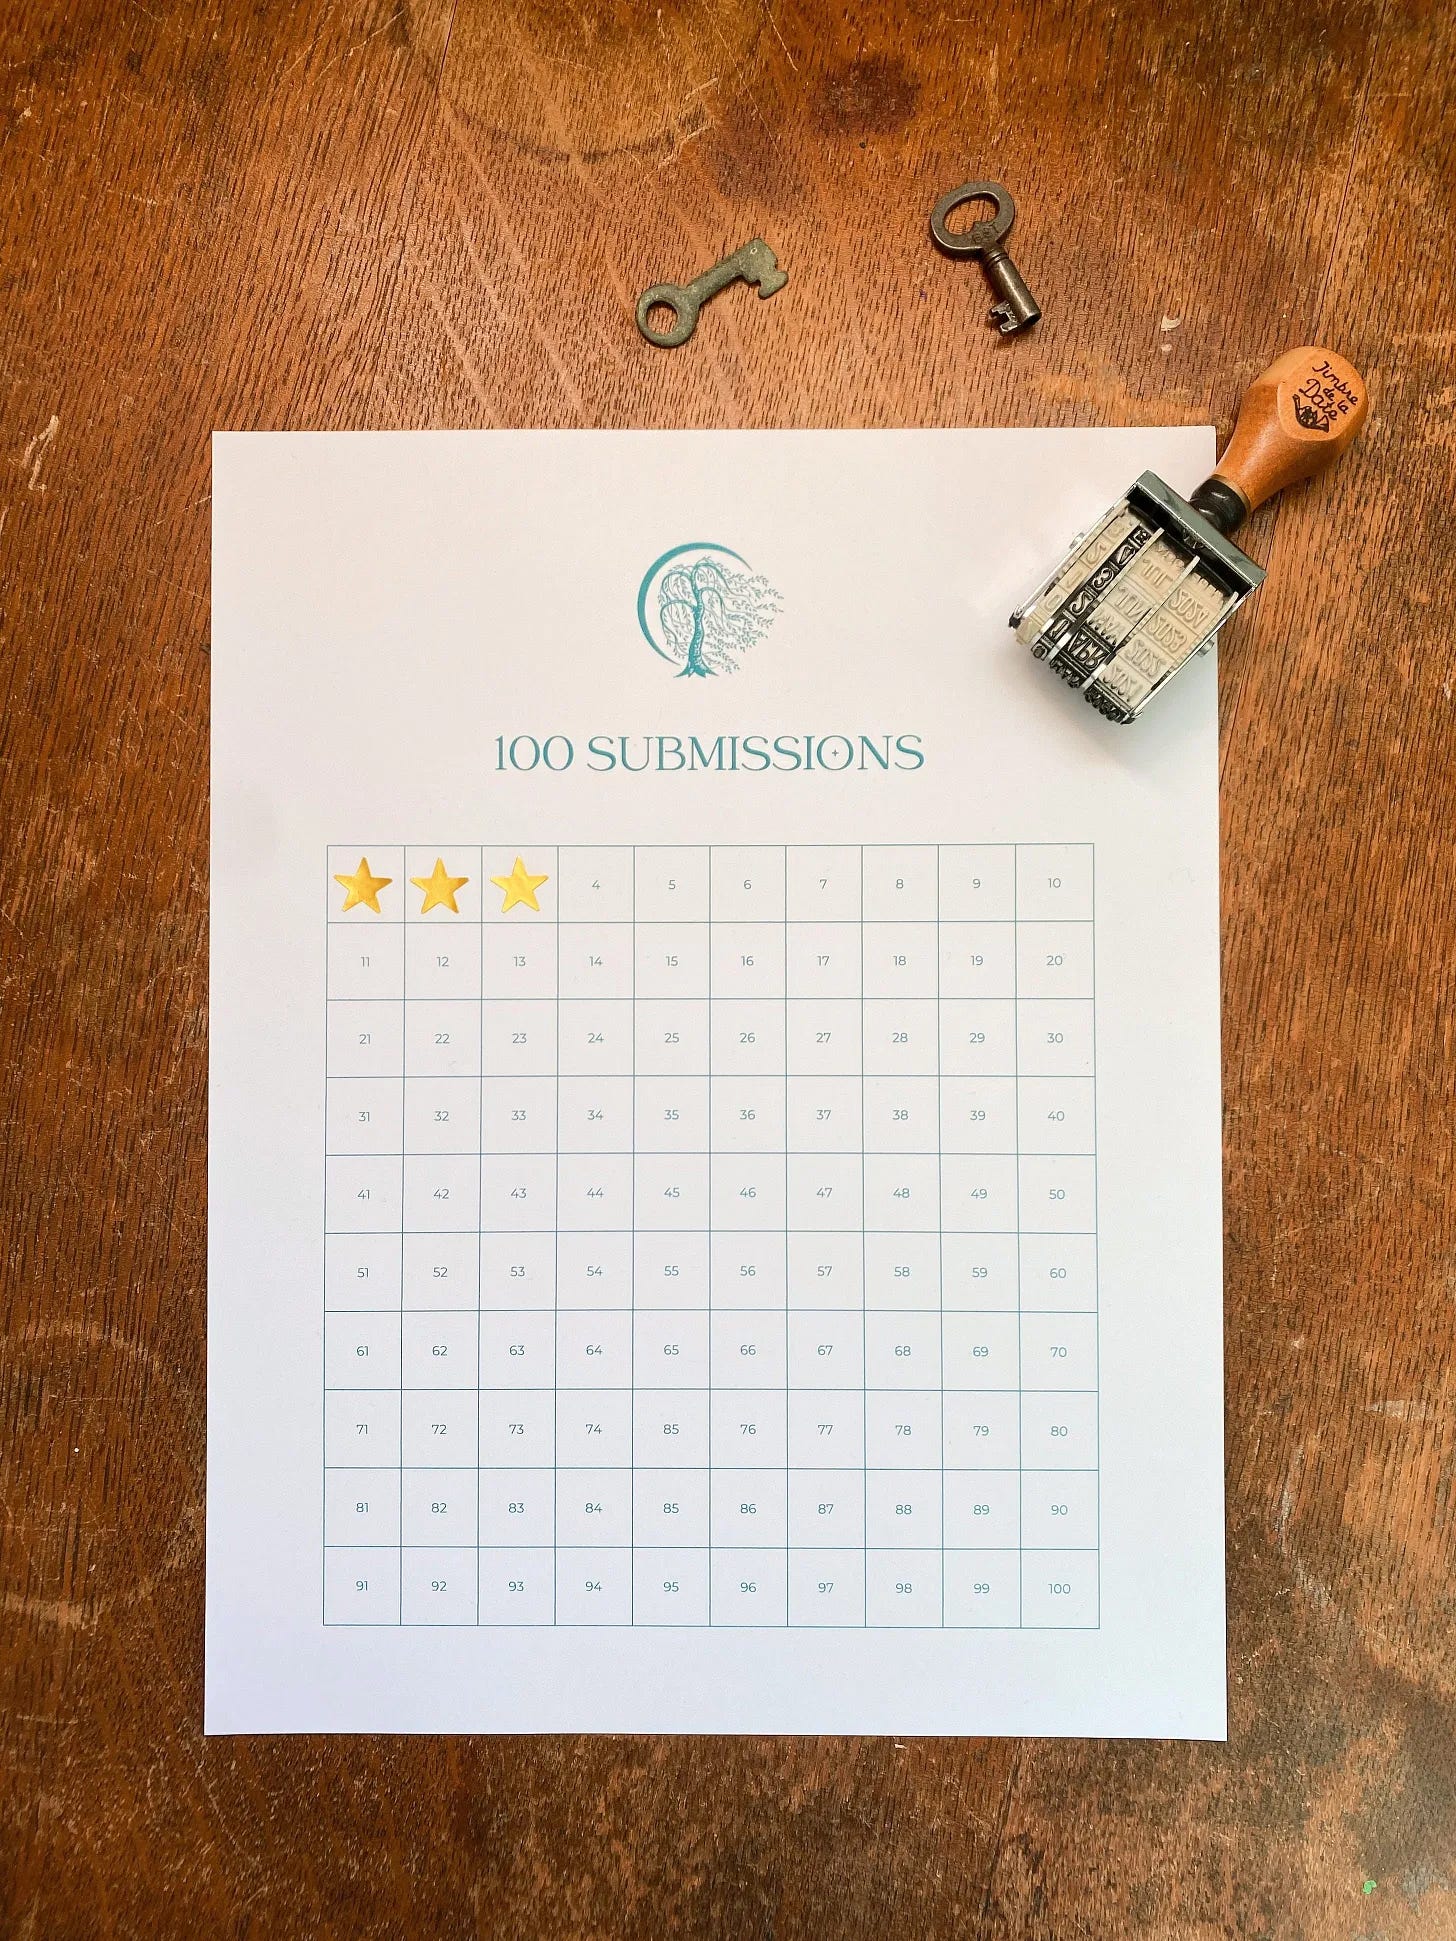 100 Submissions printable with 2 gold stars on a desk with a date stamp and two keys